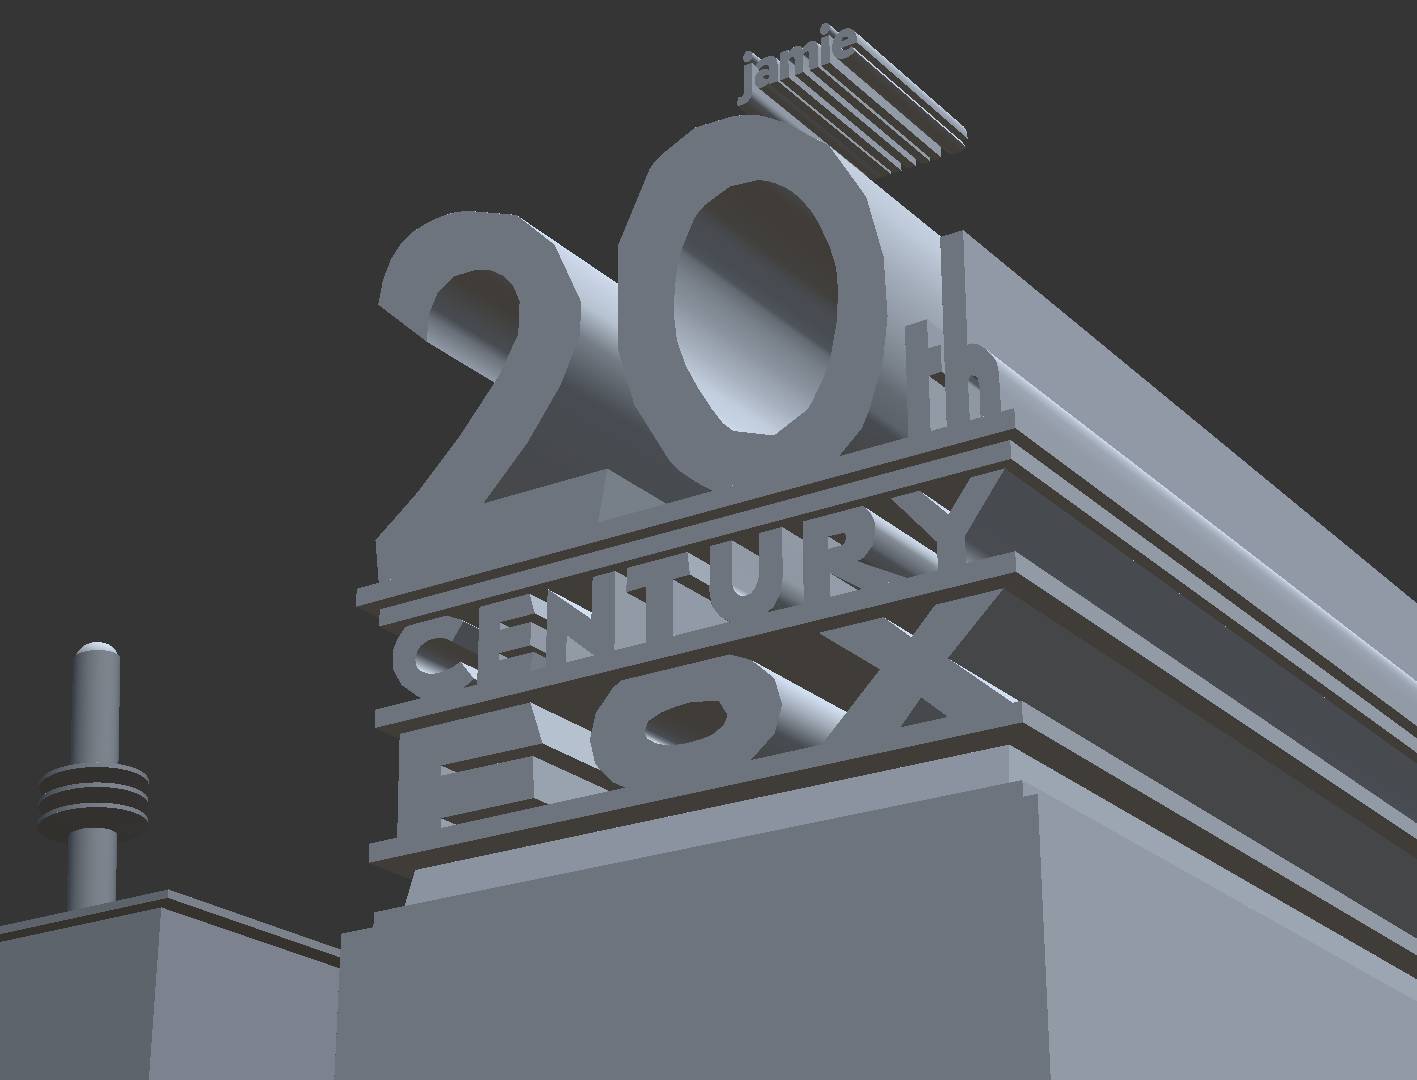 20th Century fox logo 1935 remake - Download Free 3D model by